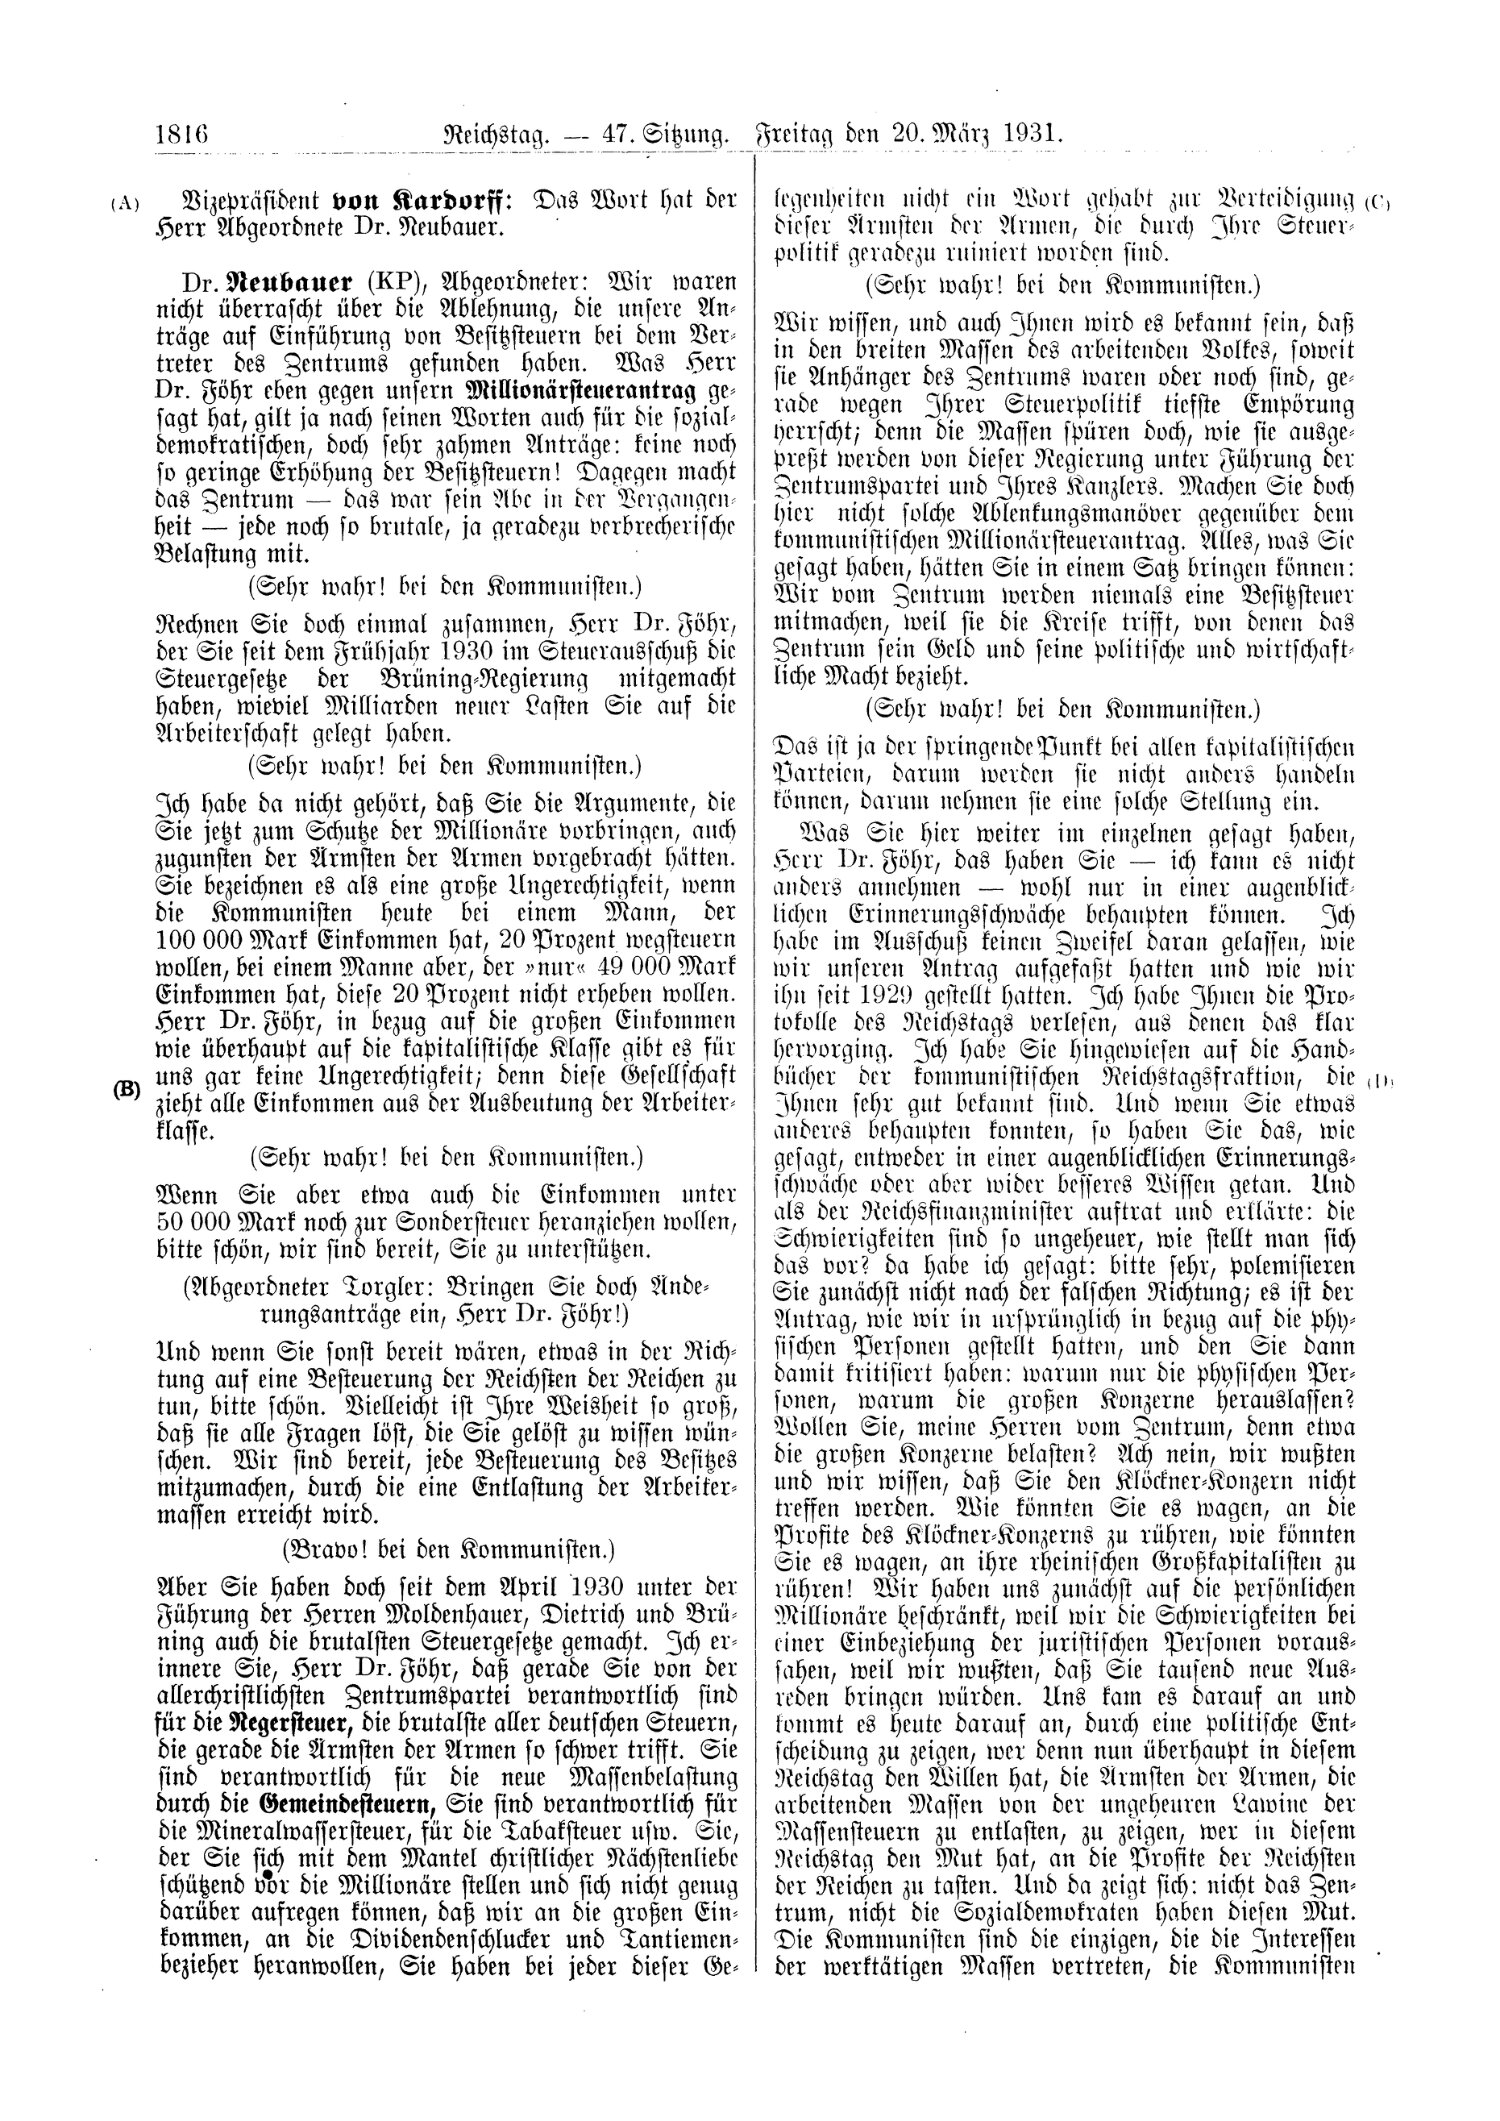 Scan of page 1816